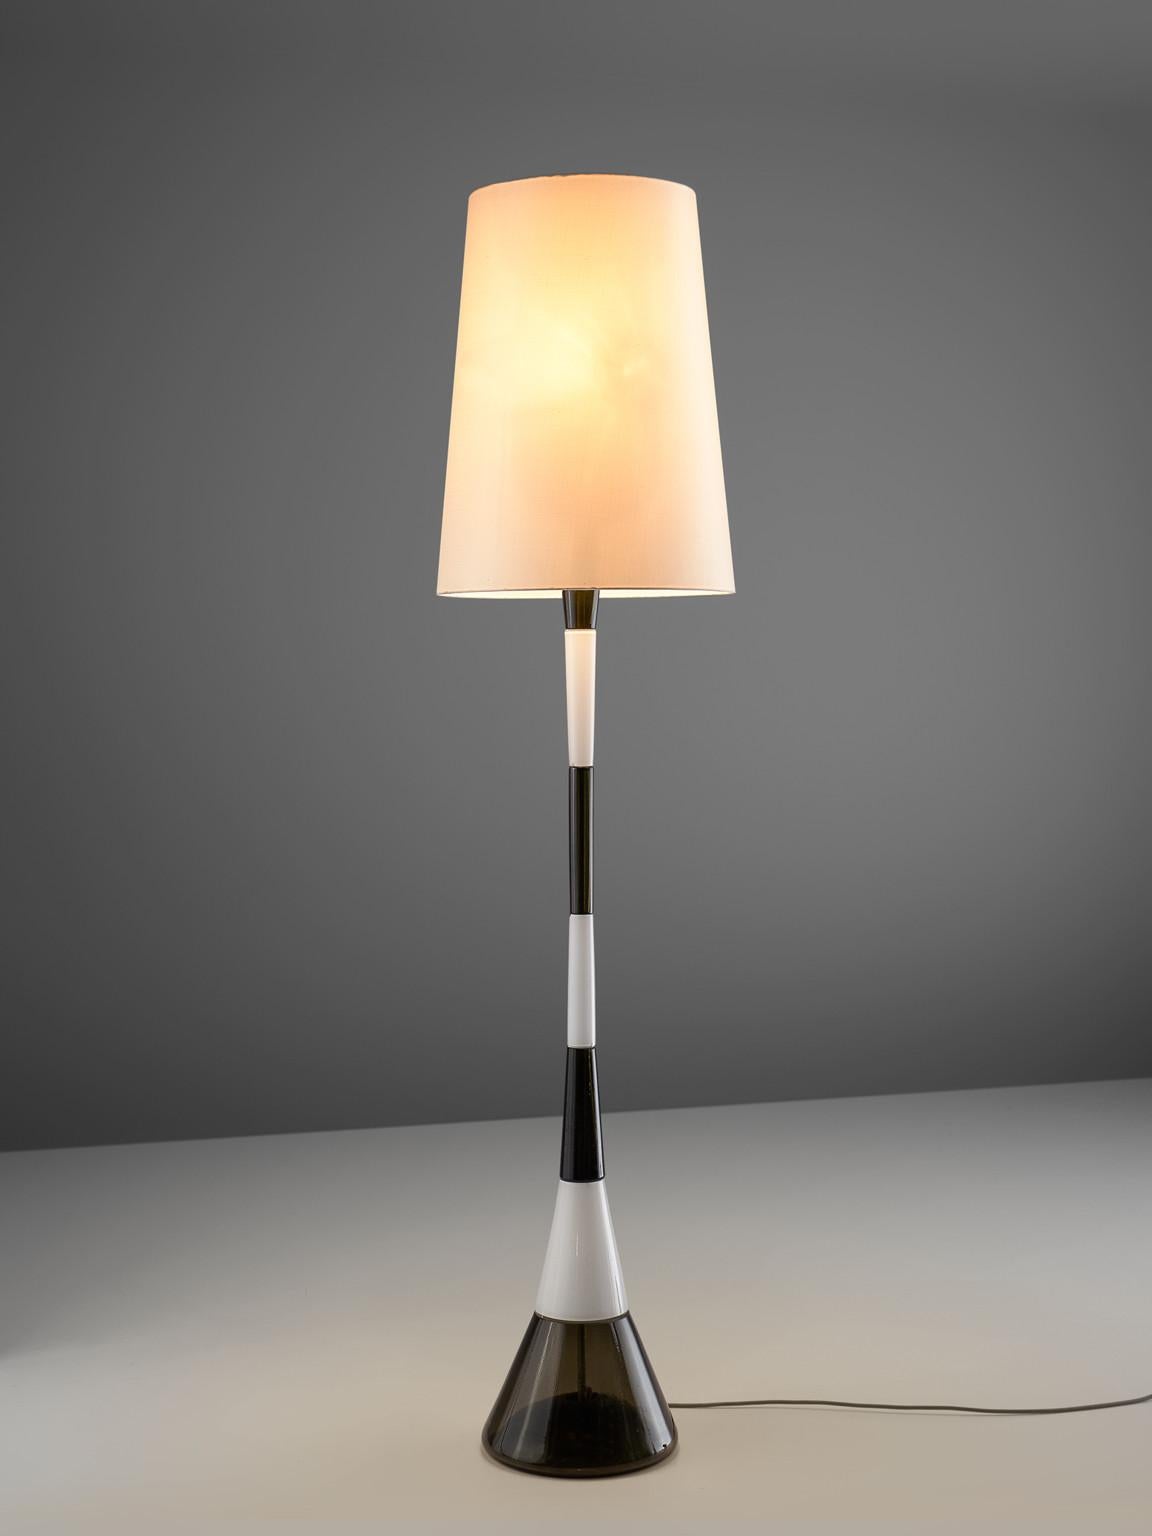 Fulvio Bianconi for Venini, floor lamp, Murano glass and brass, Italy, 1950s.

Rare floor lamp in two-tone Murano glass designed by the Italian glass artist Fulvio Bianconi. The foot lamp is build up in black and white colored layers of glass. The